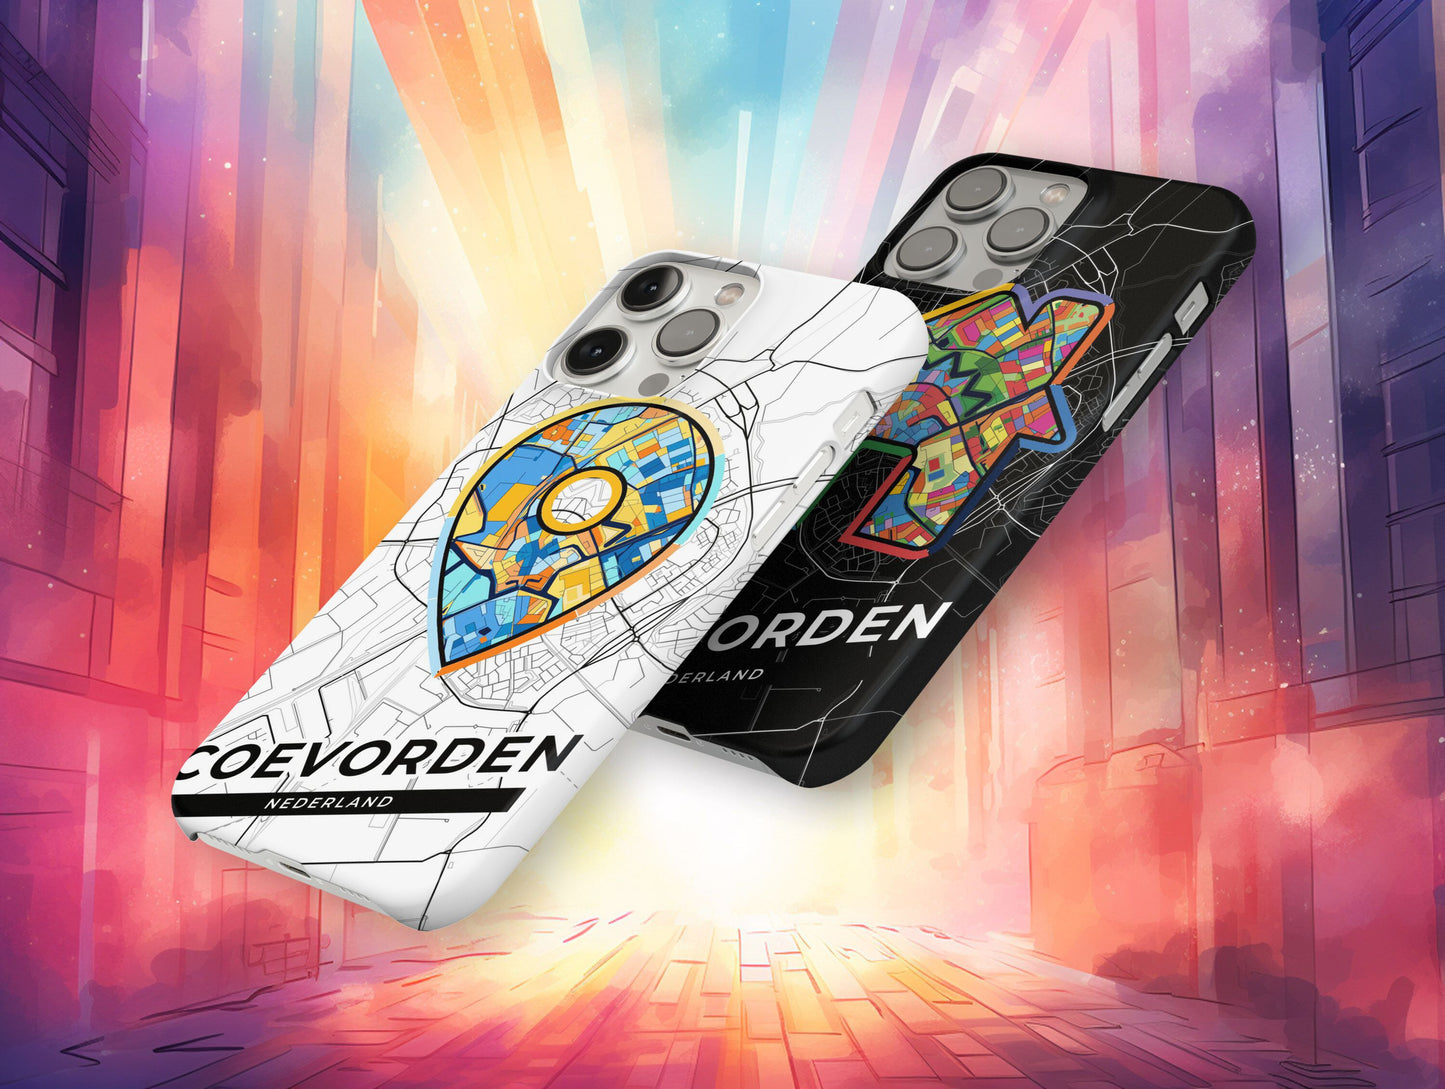 Coevorden Netherlands slim phone case with colorful icon. Birthday, wedding or housewarming gift. Couple match cases.